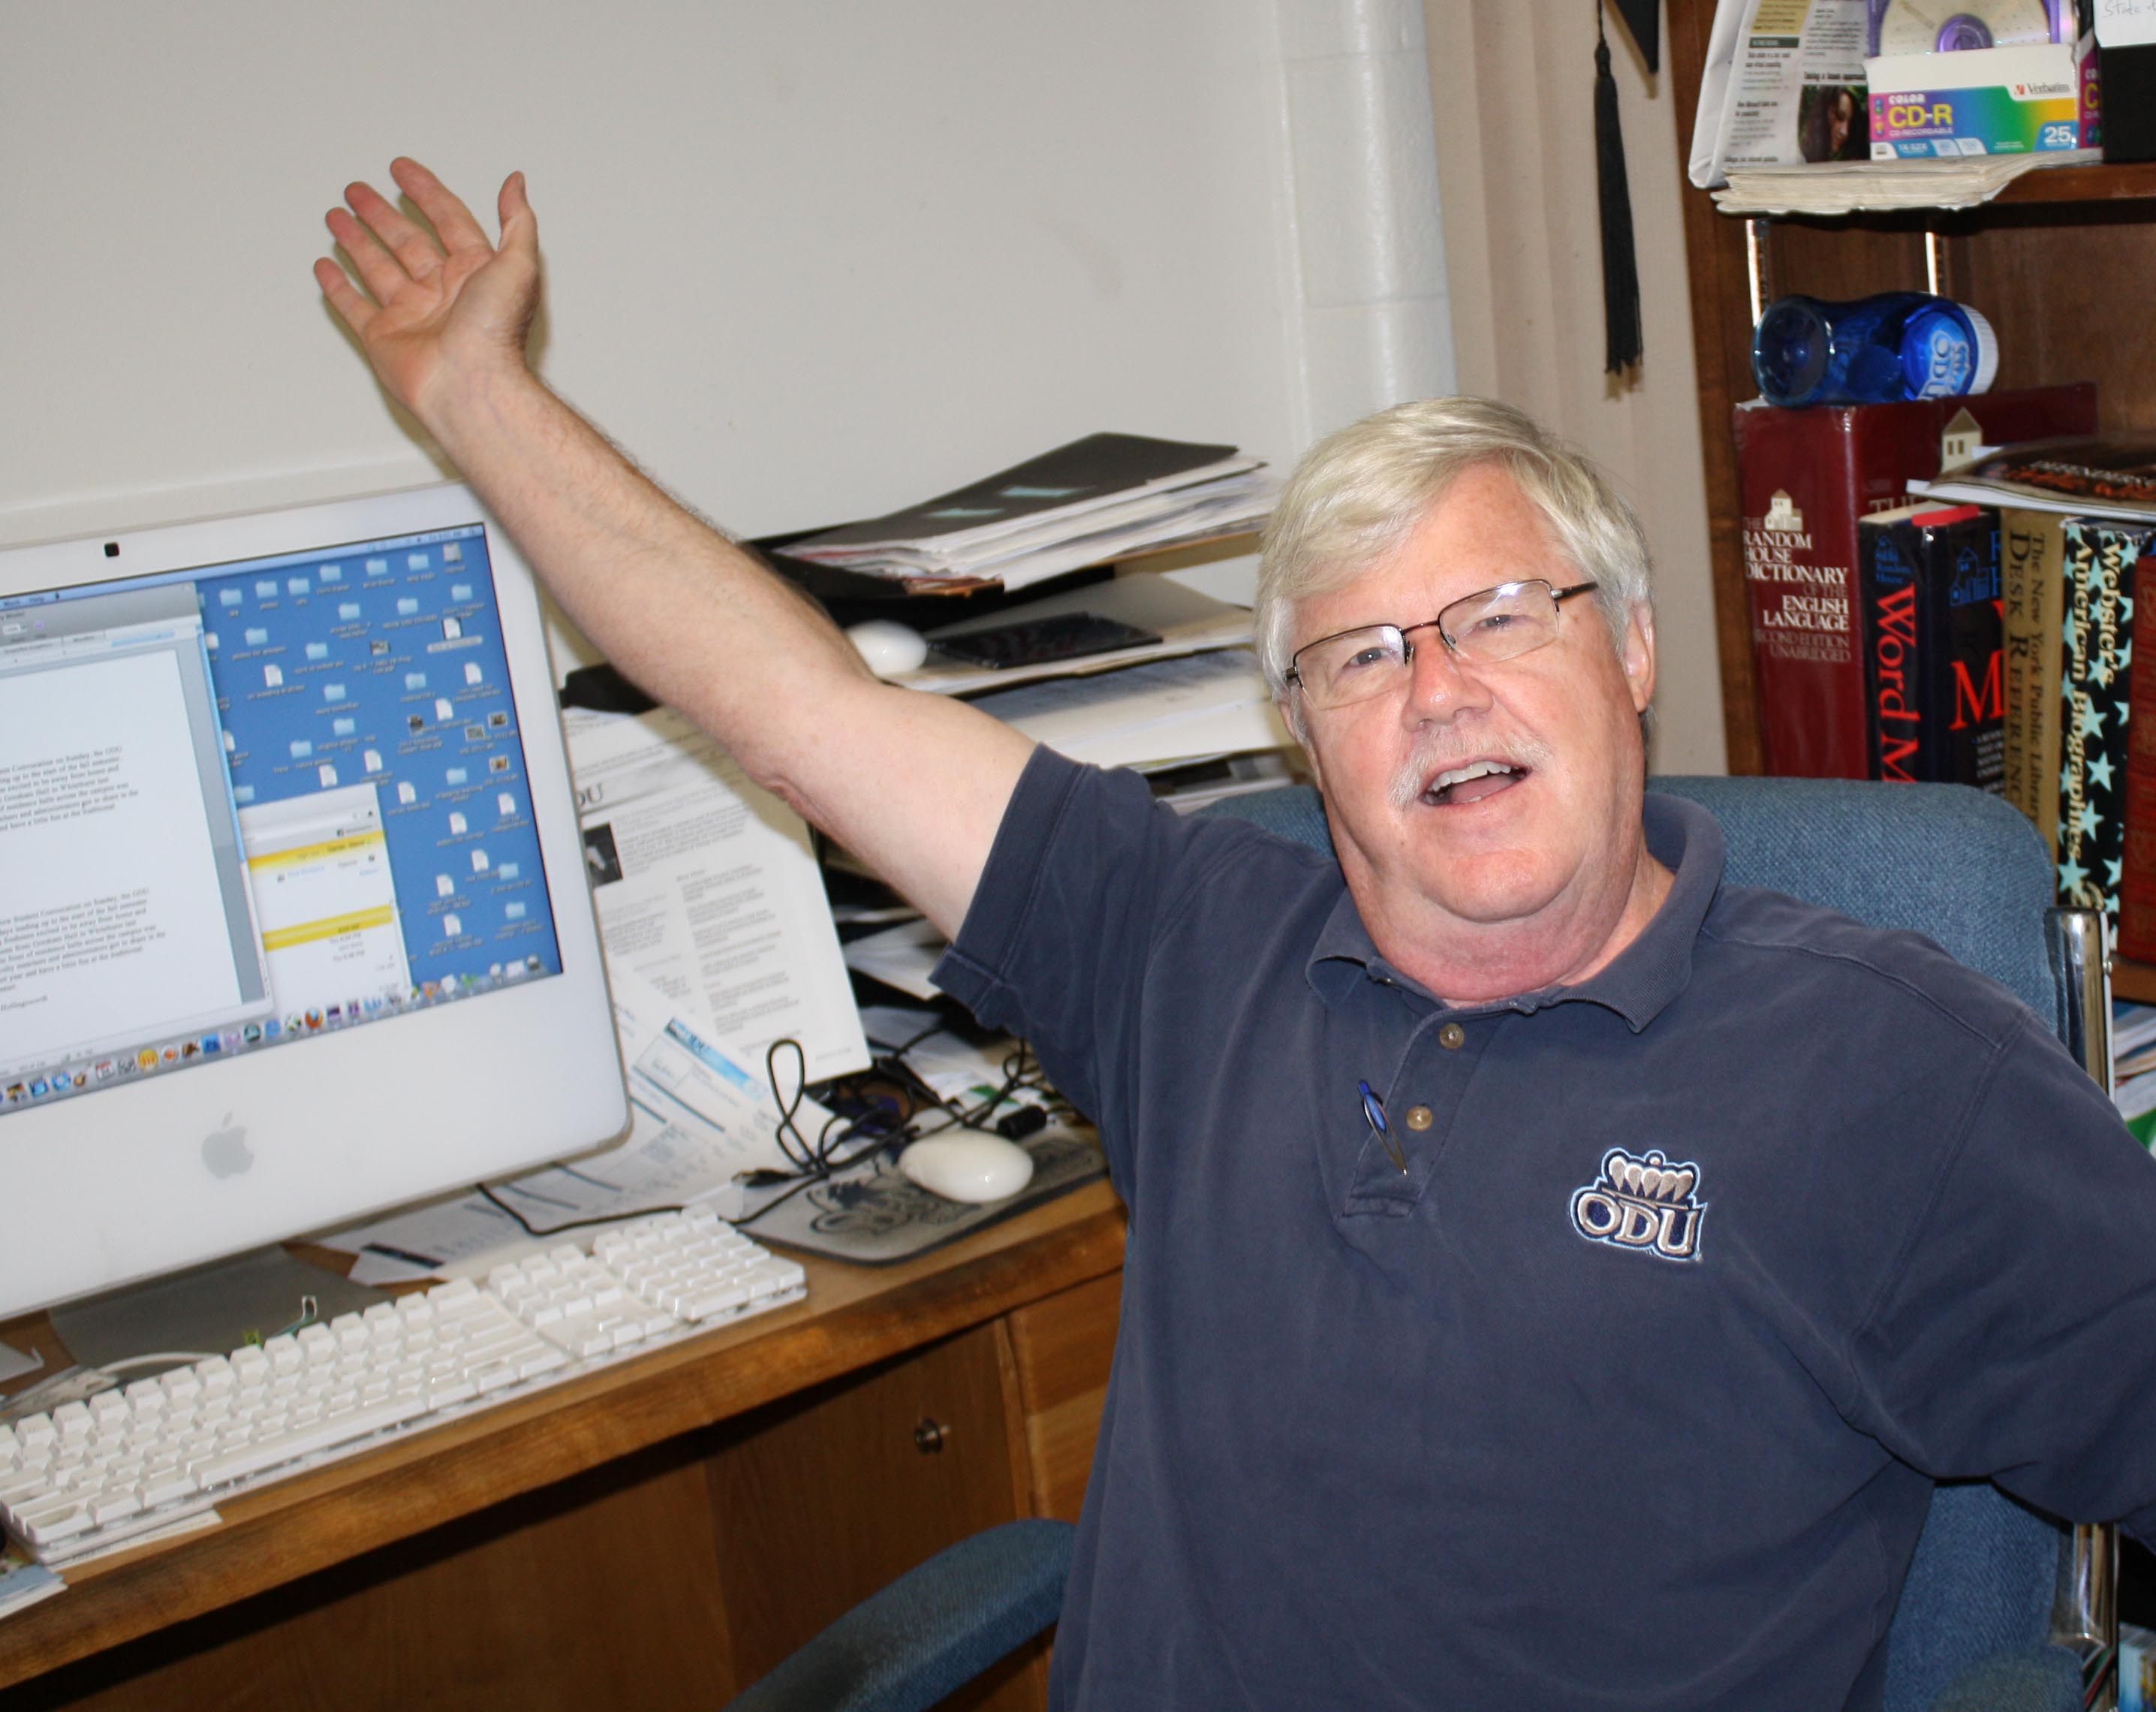 this is a photo of Steve Daniel, ODU editor, at his desk